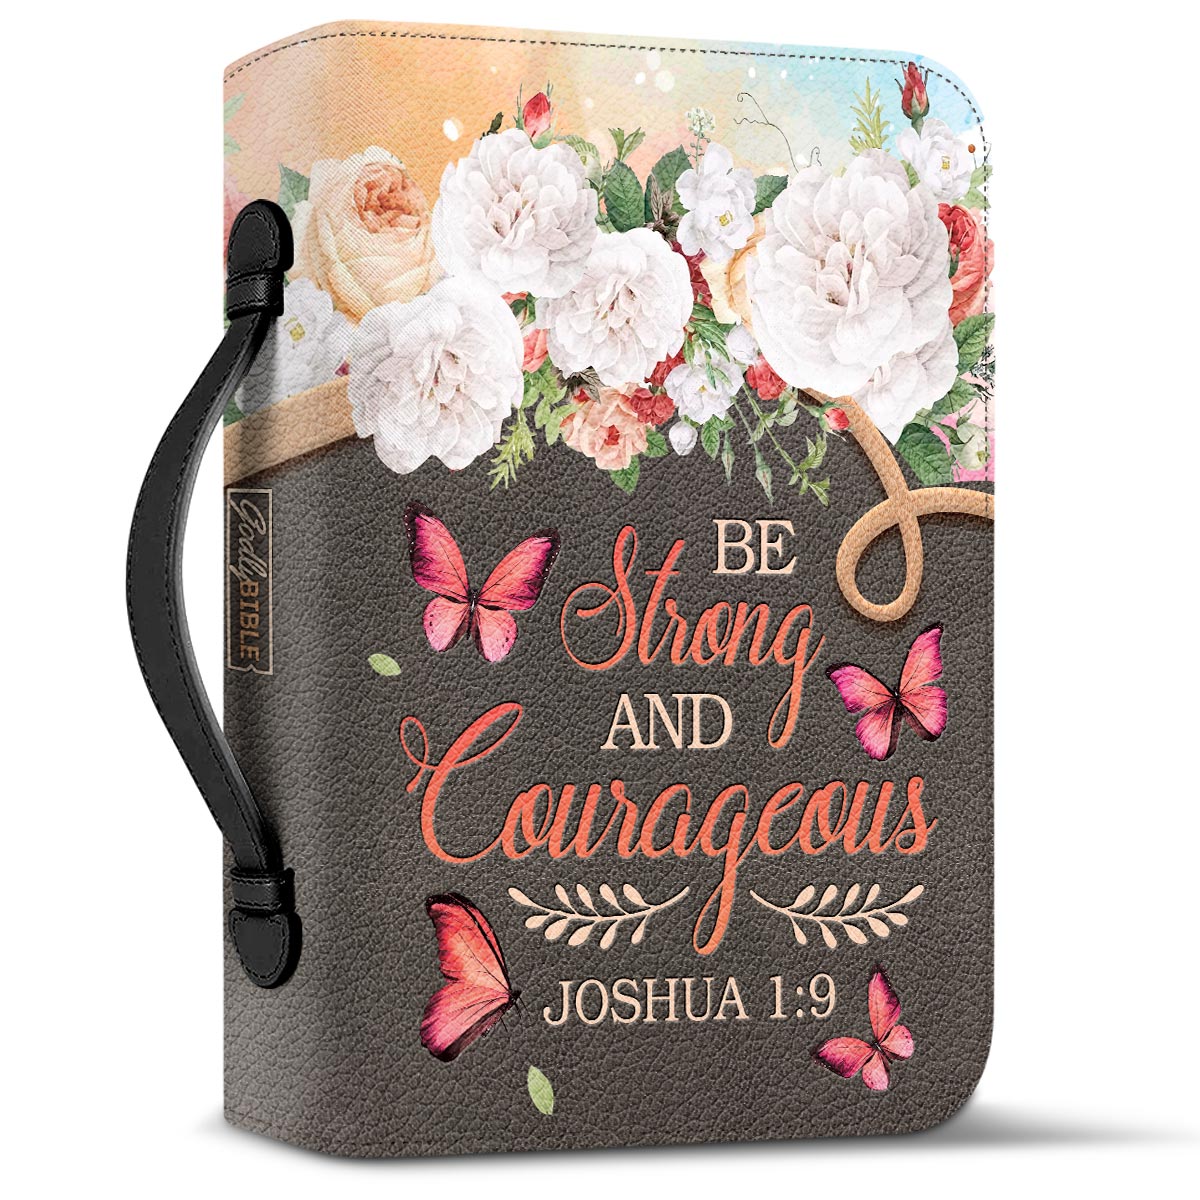  Personalized Bible Cover - Be Strong And Courageous Joshua 1 9 Butterfly Vintage Flower Bible Cover for Christians